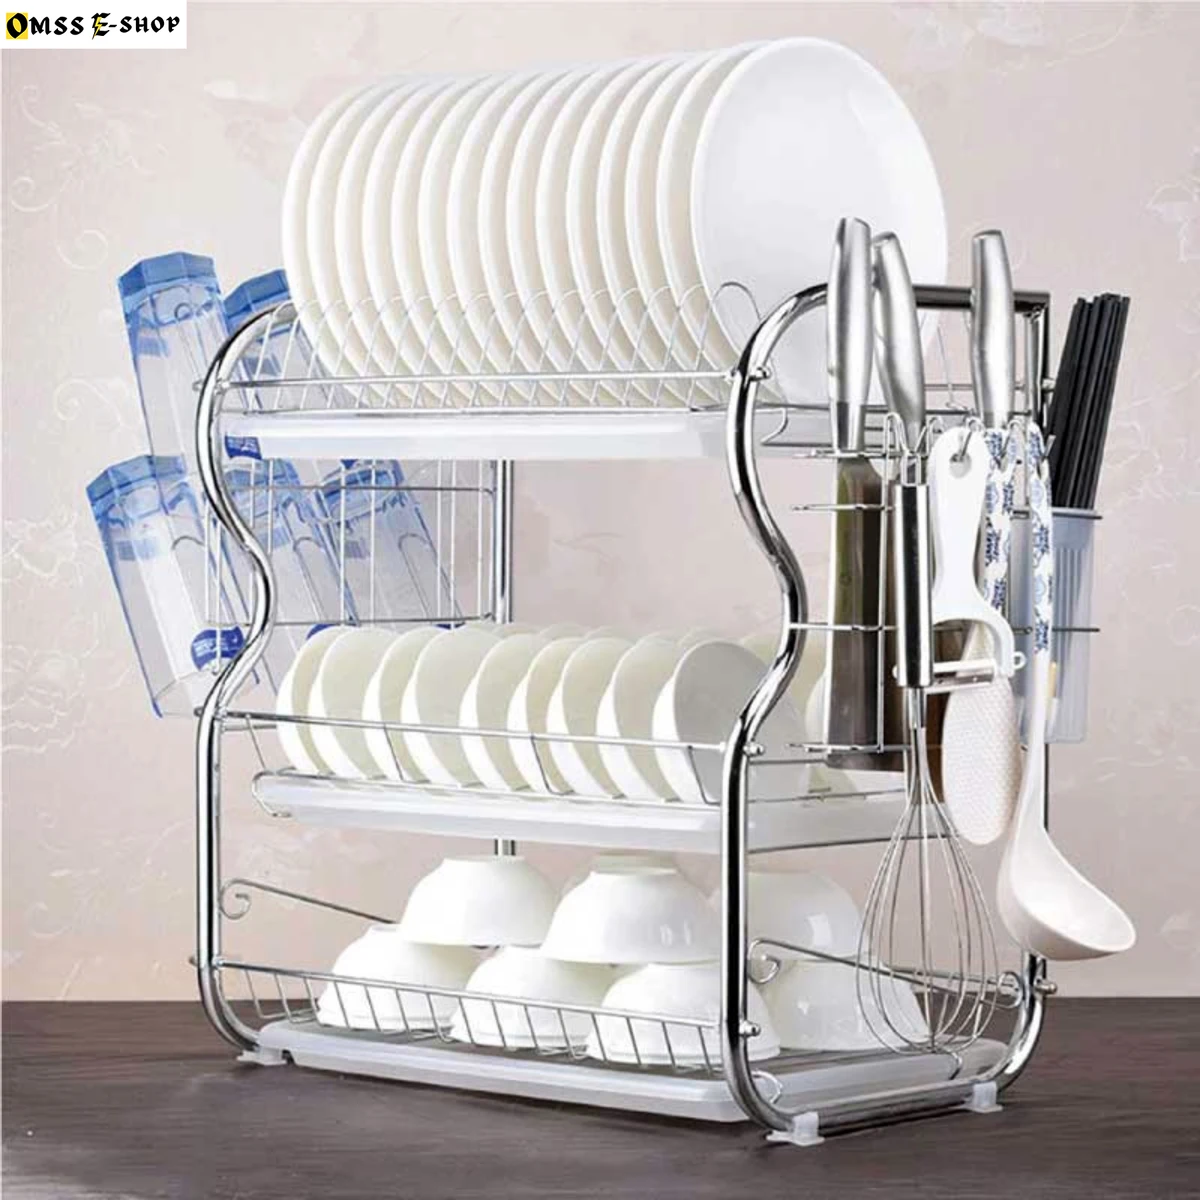 Dish Drying Rack 3-Tier Stainless Steel Kitchen Shelf Dish Rack Draining Kitchen Plate Cup Dish Drying Rack Tray Cutlery Dish Drainer